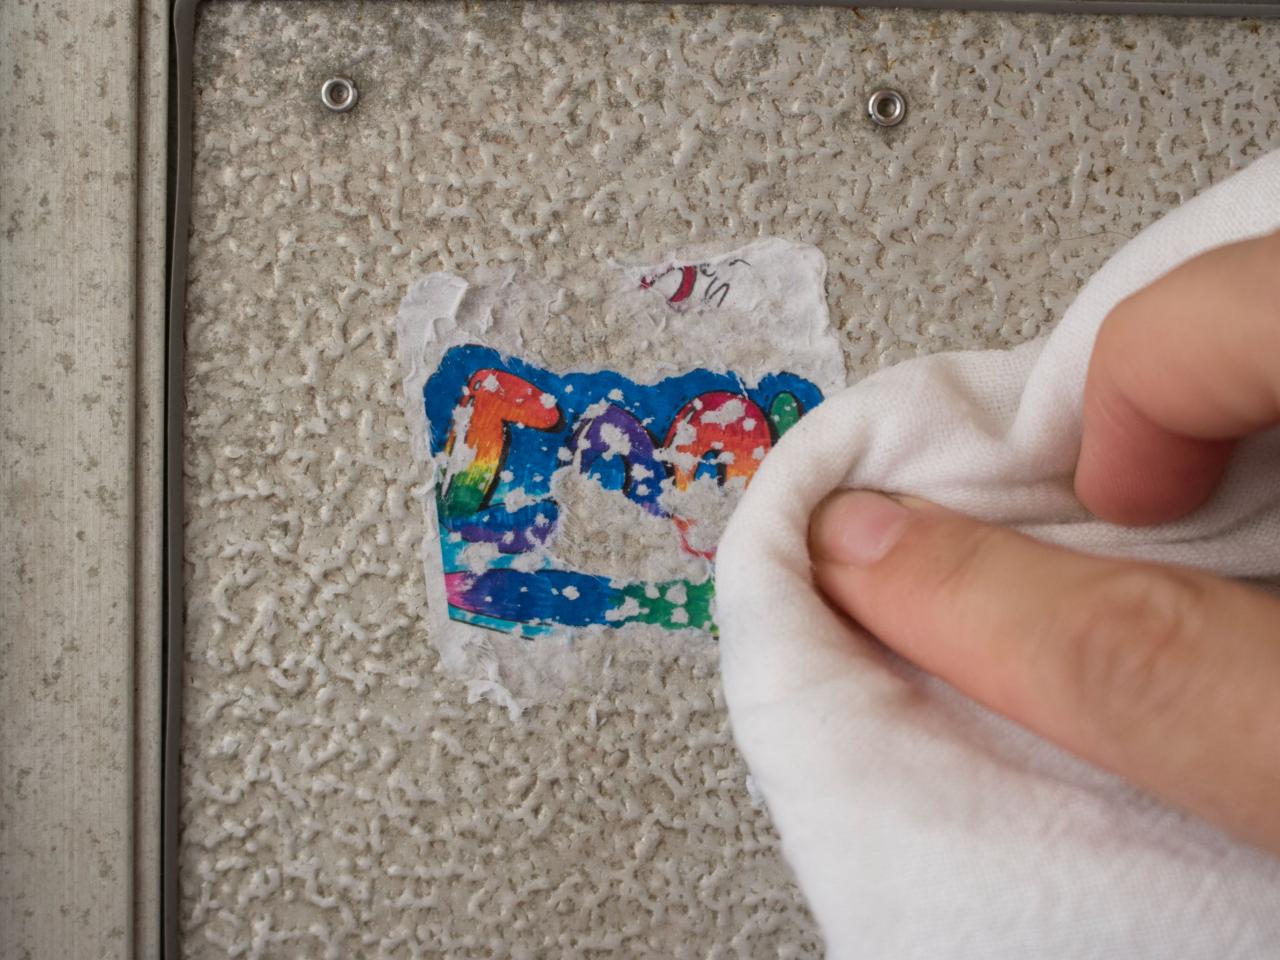 How To Get Sticky Labels Off Pans How to Remove a Sticker From a Metal Surface | HGTV